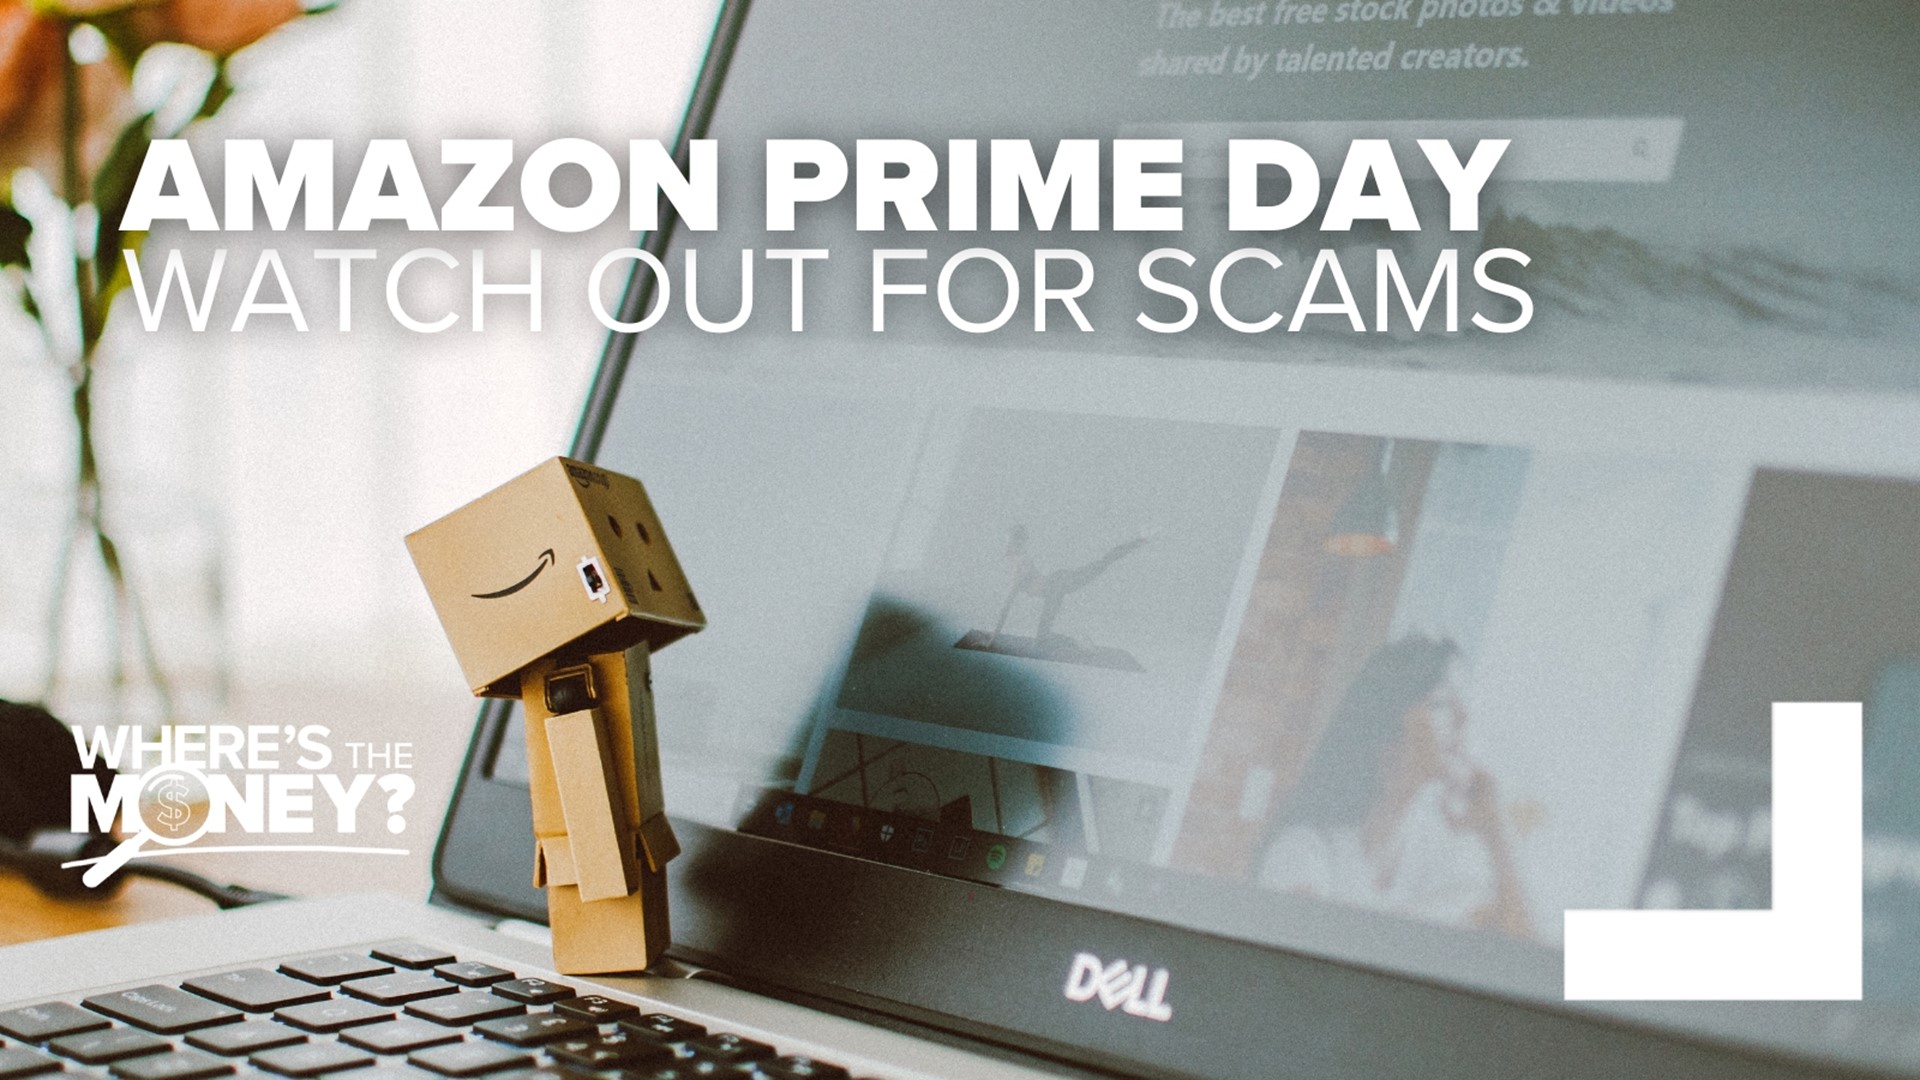 Multimillionaire Jeff Bezos initially founded the day on July 4, 1994, and then established Amazon Prime in 2005.